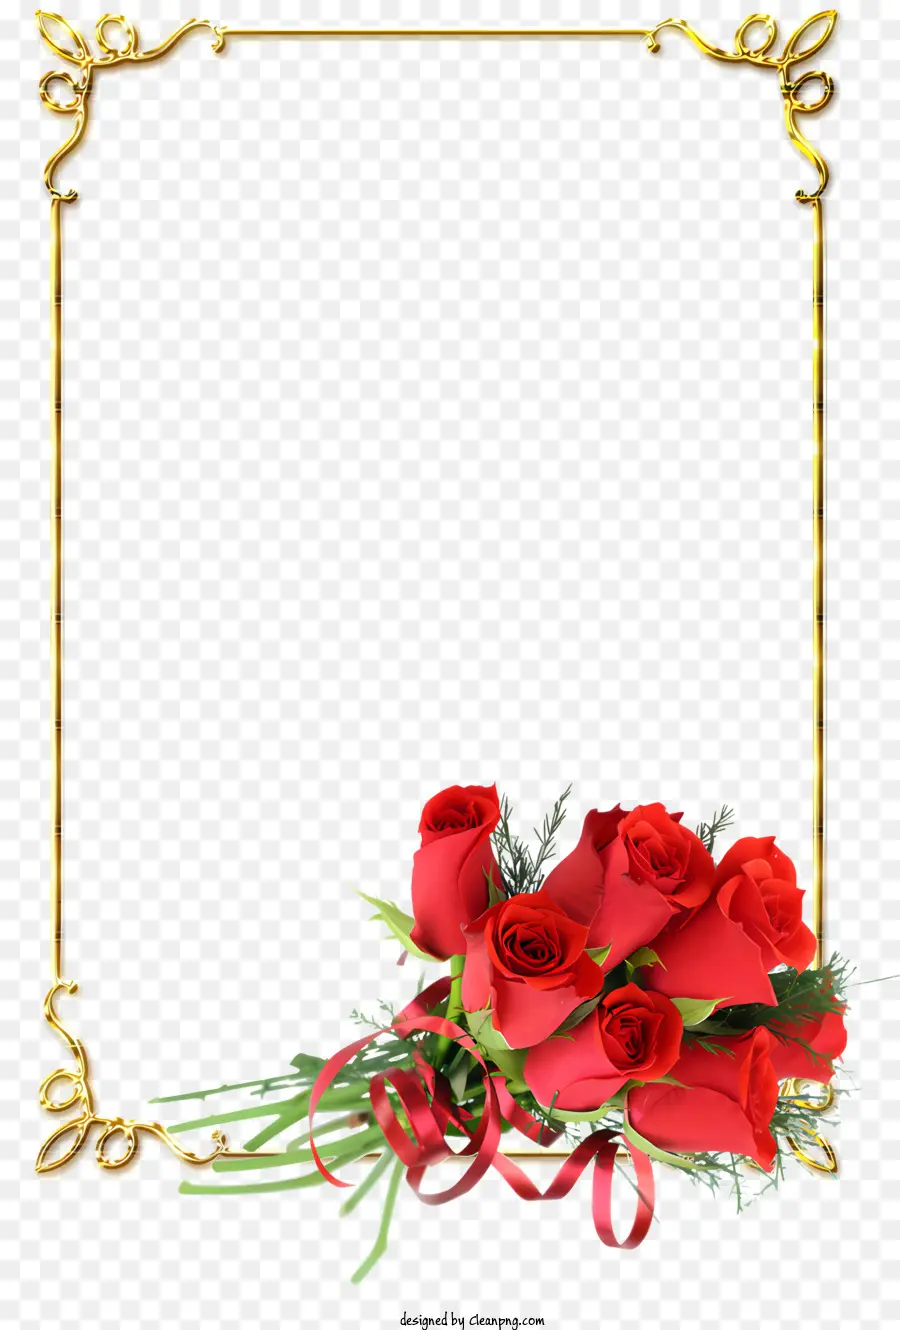 Roses，Les Roses Rouges PNG